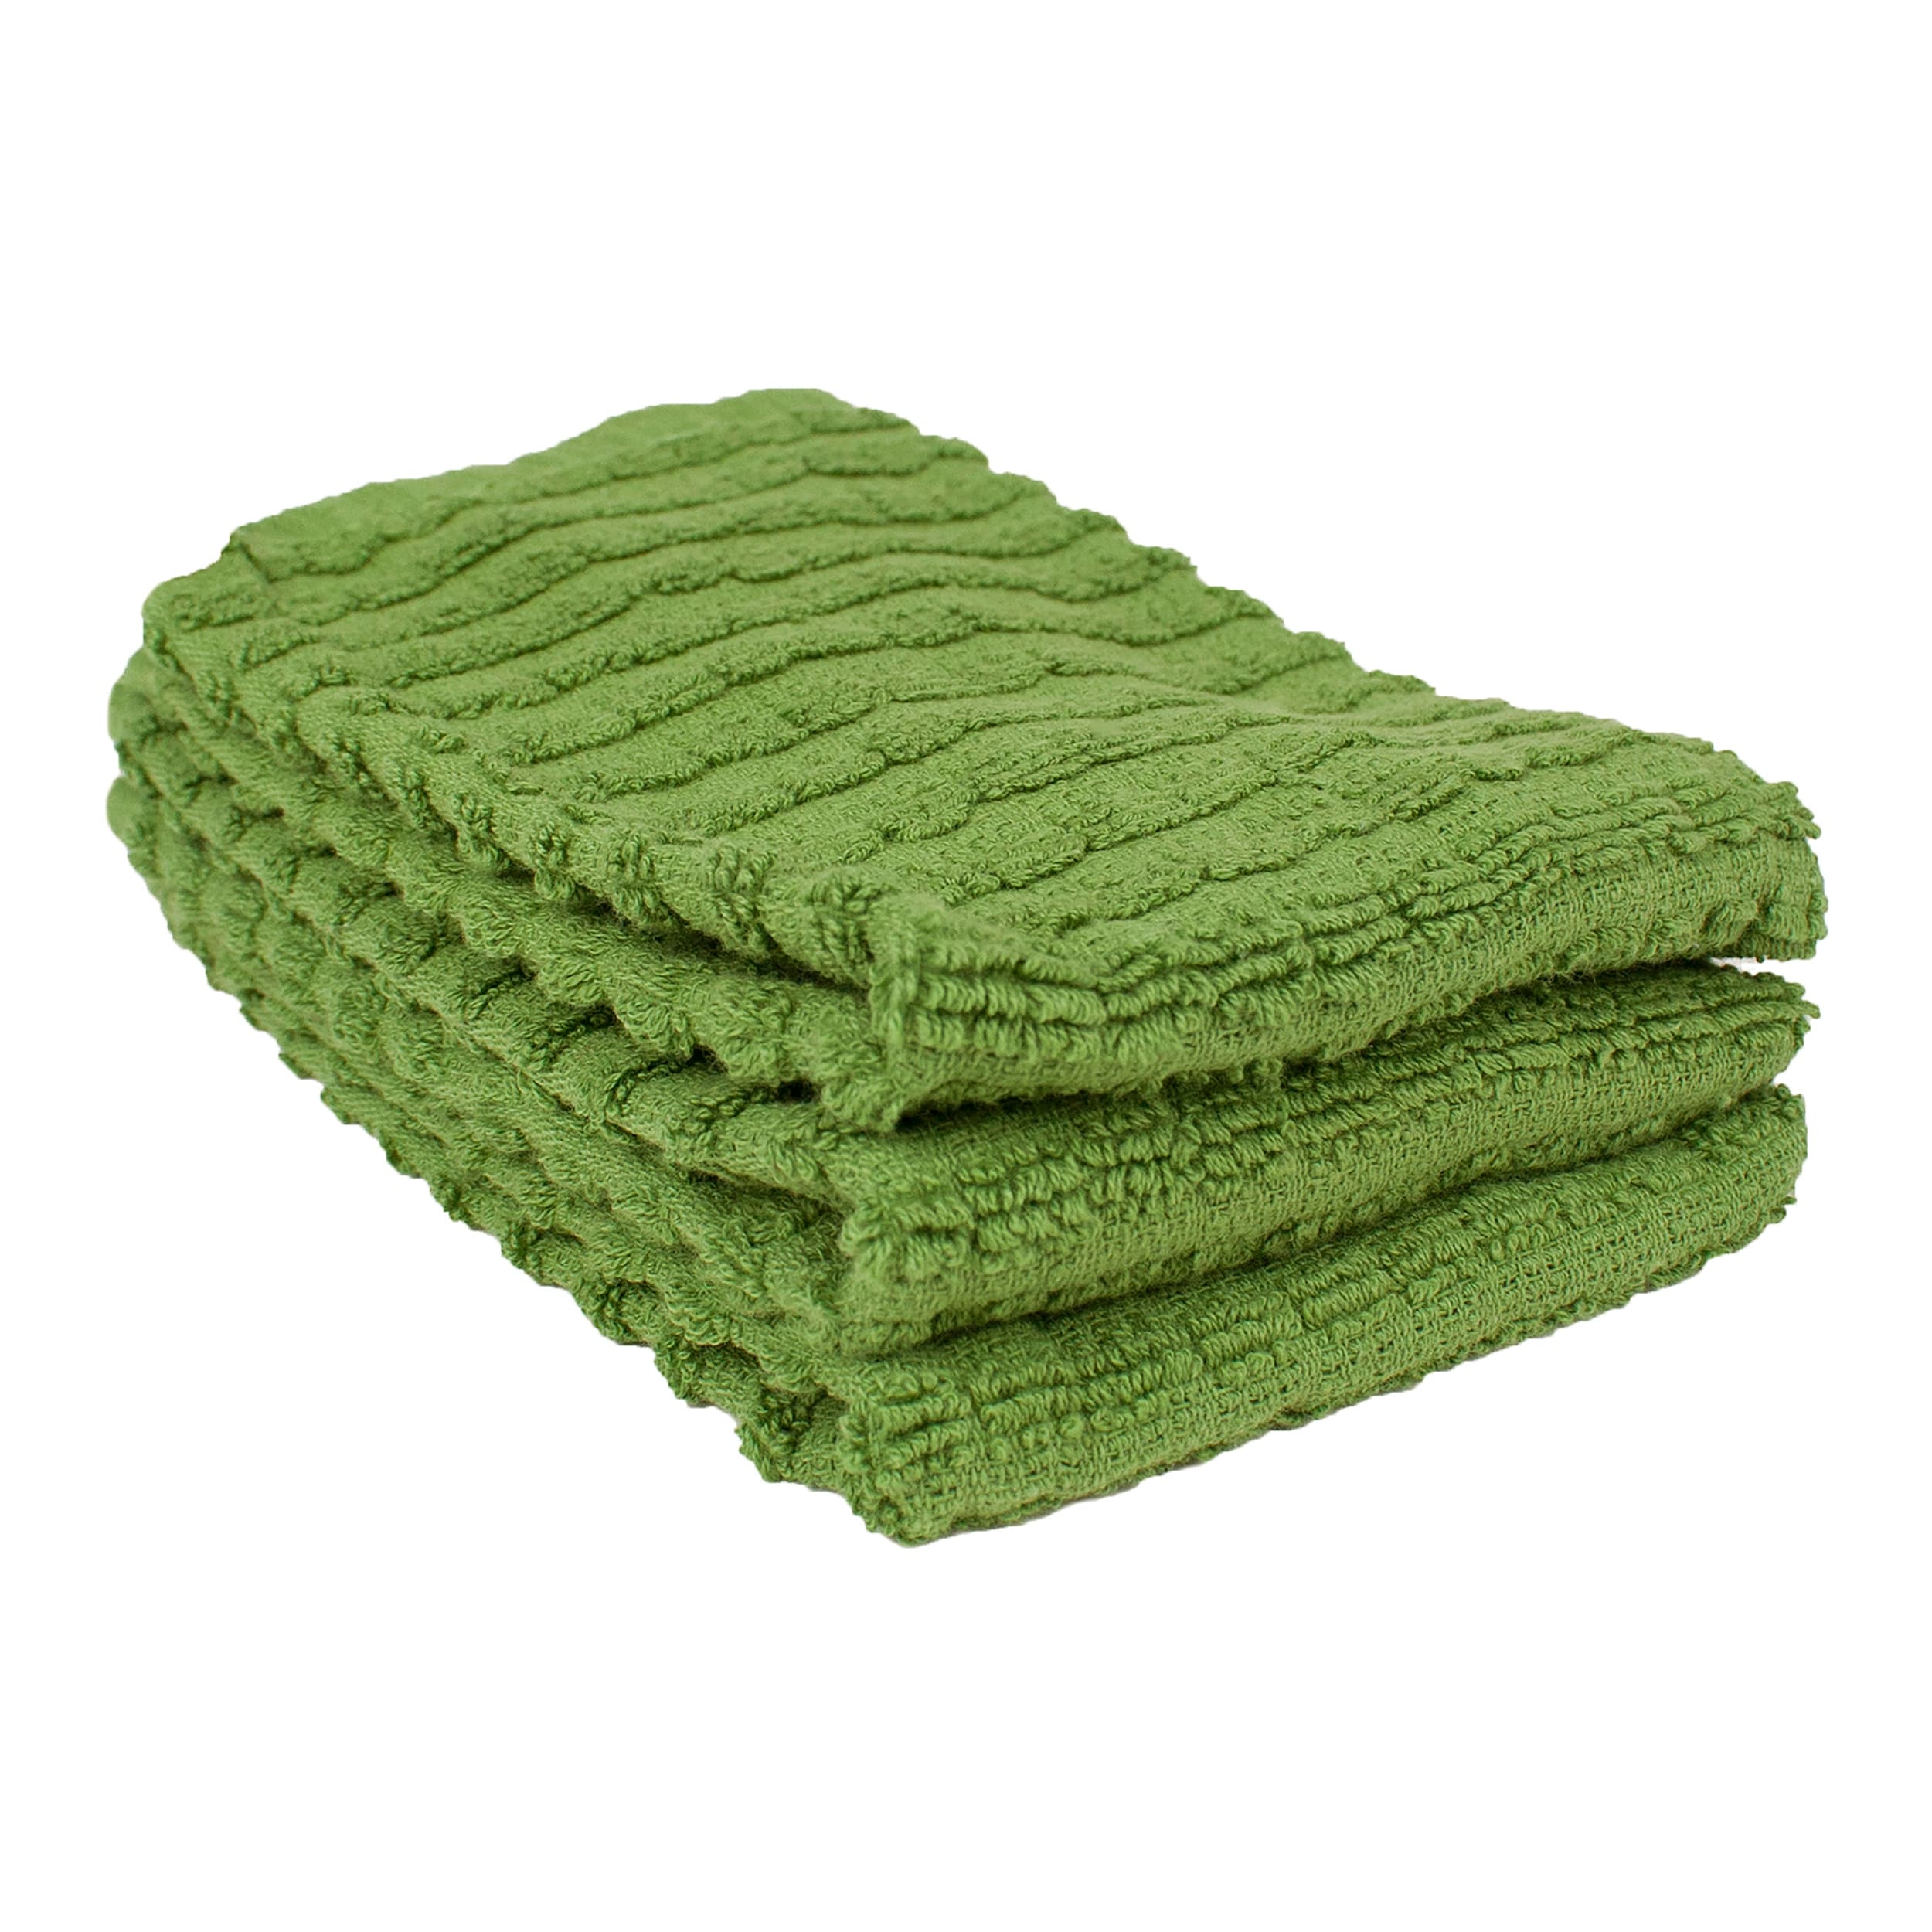 https://ak1.ostkcdn.com/images/products/is/images/direct/52f13a7e5a79106fc630151e13331c44544feac0/Royale-Solid-Cactus-Cotton-Dish-Cloths-%28Set-of-3%29.jpg